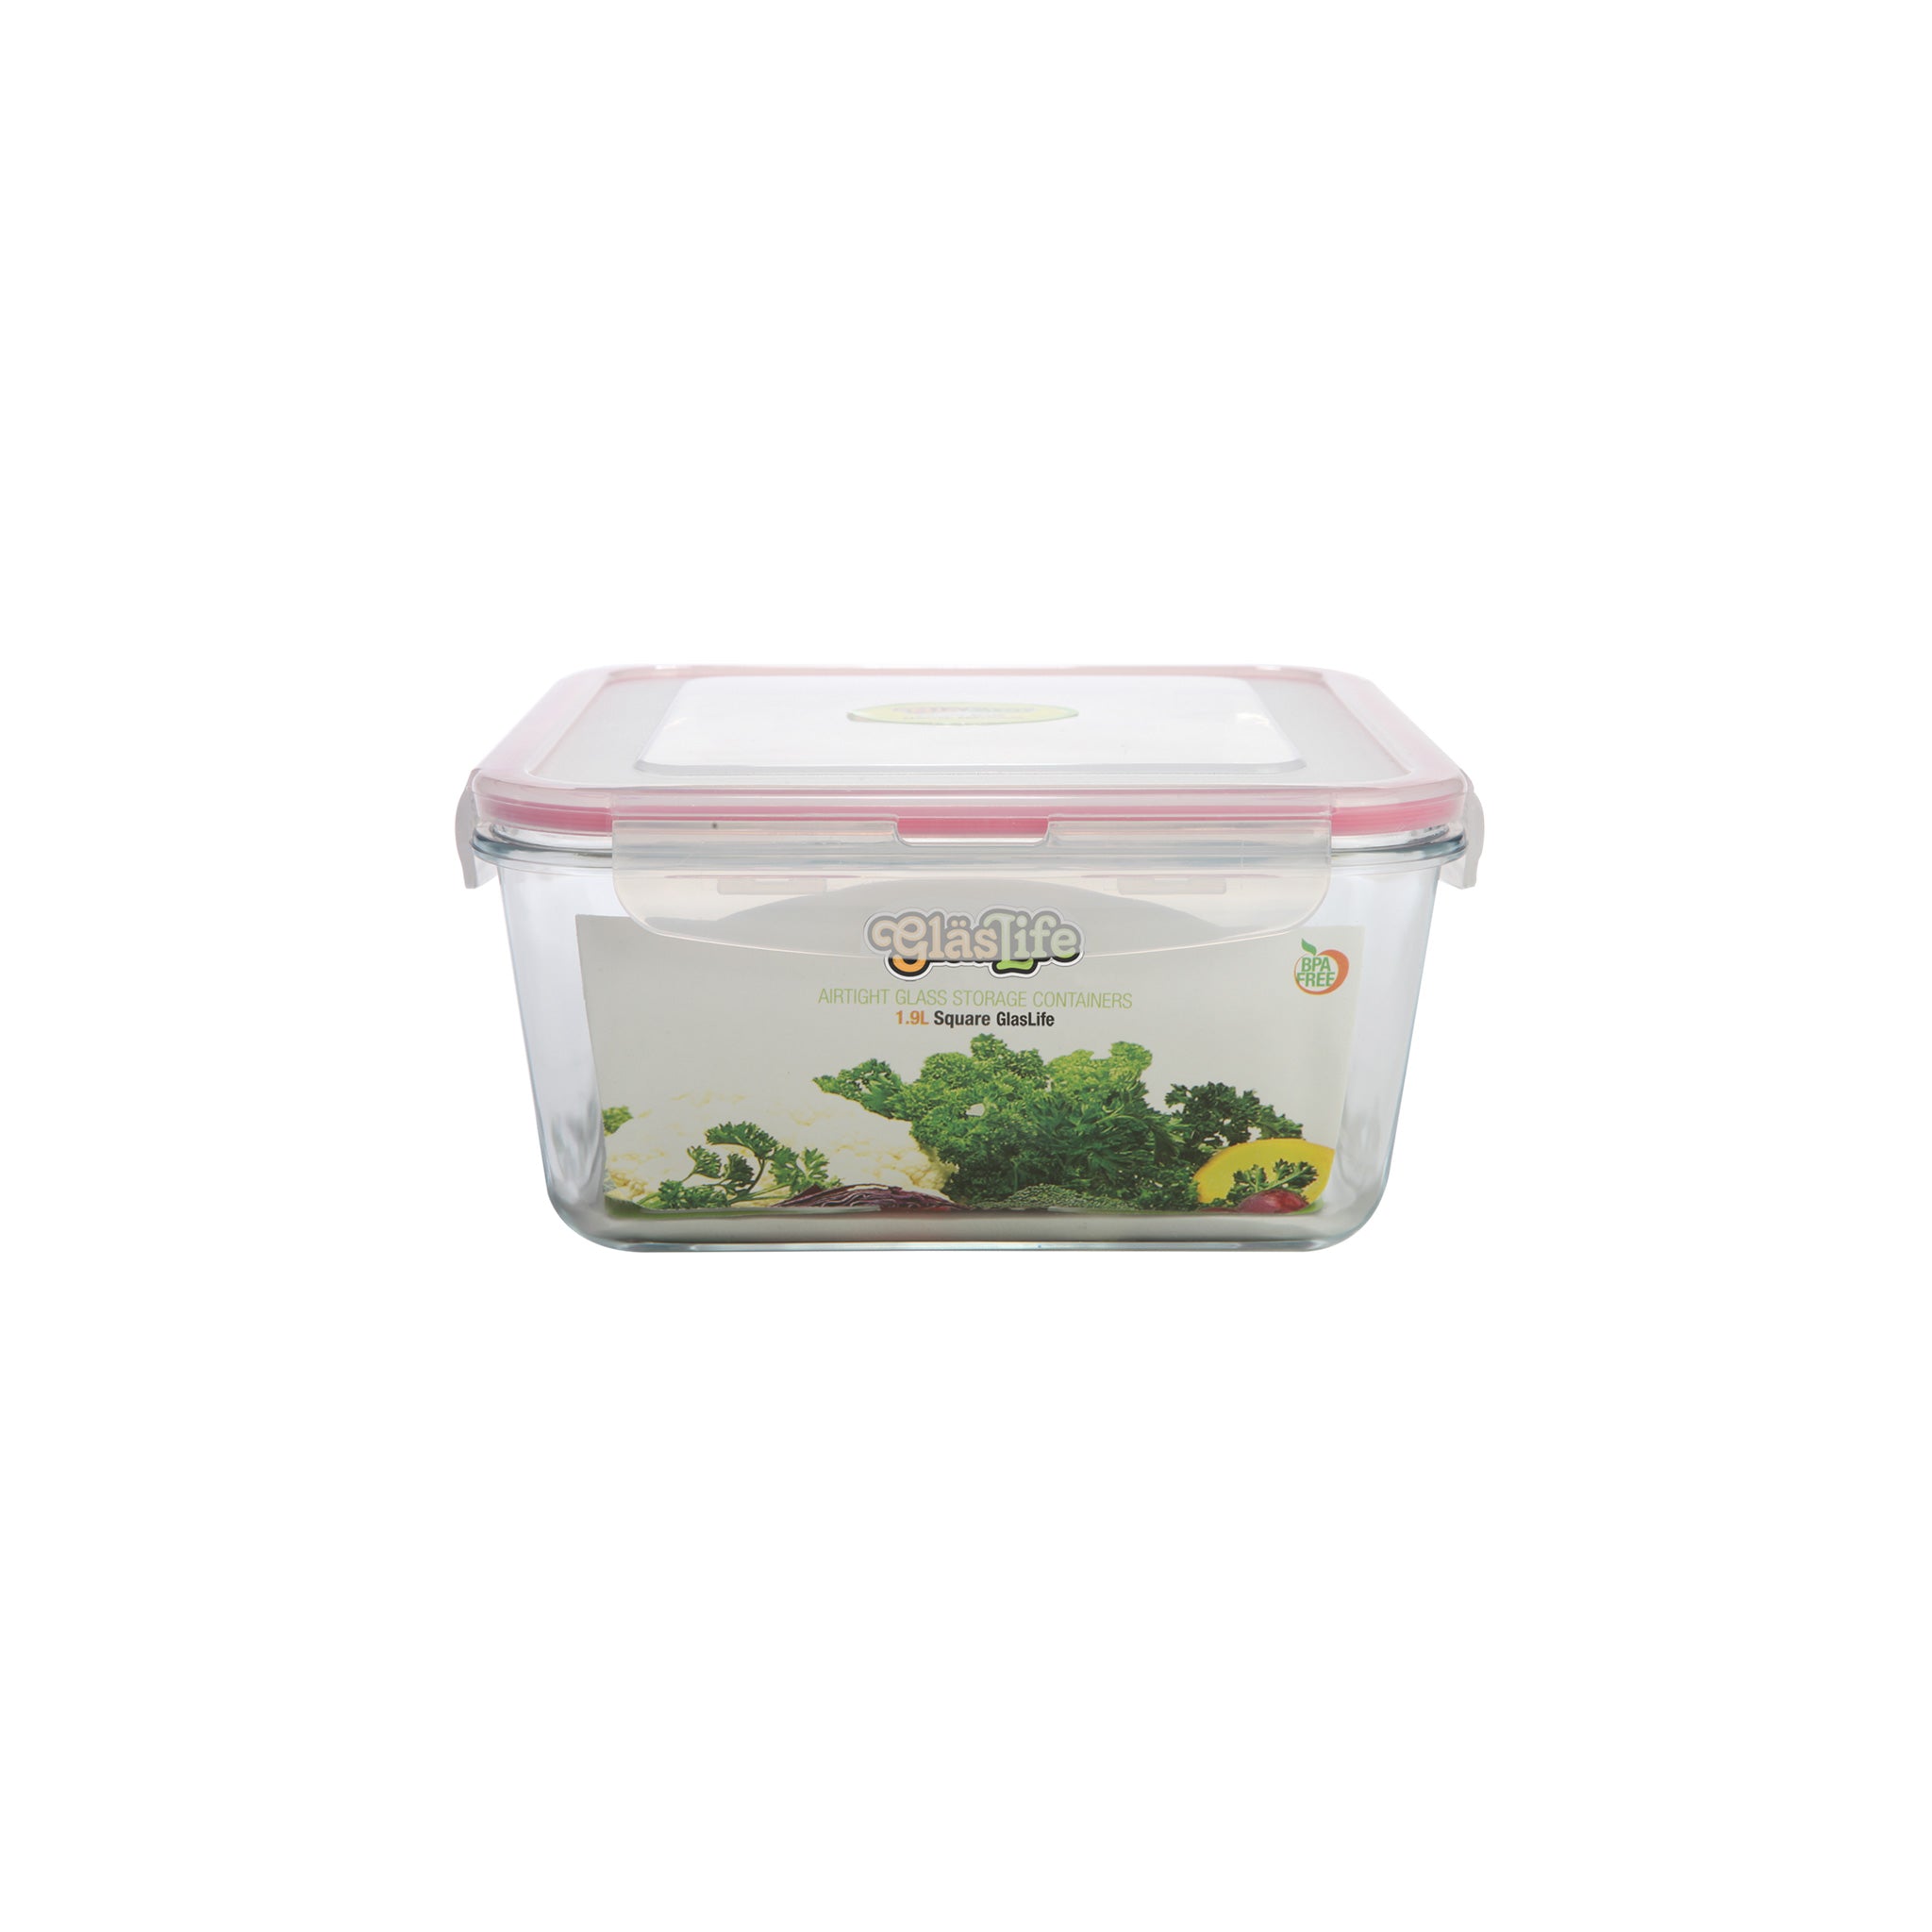 GlasLife® Air-Tight Glass Storage Container - Square GLS05 Small 17 oz / 0.5 L